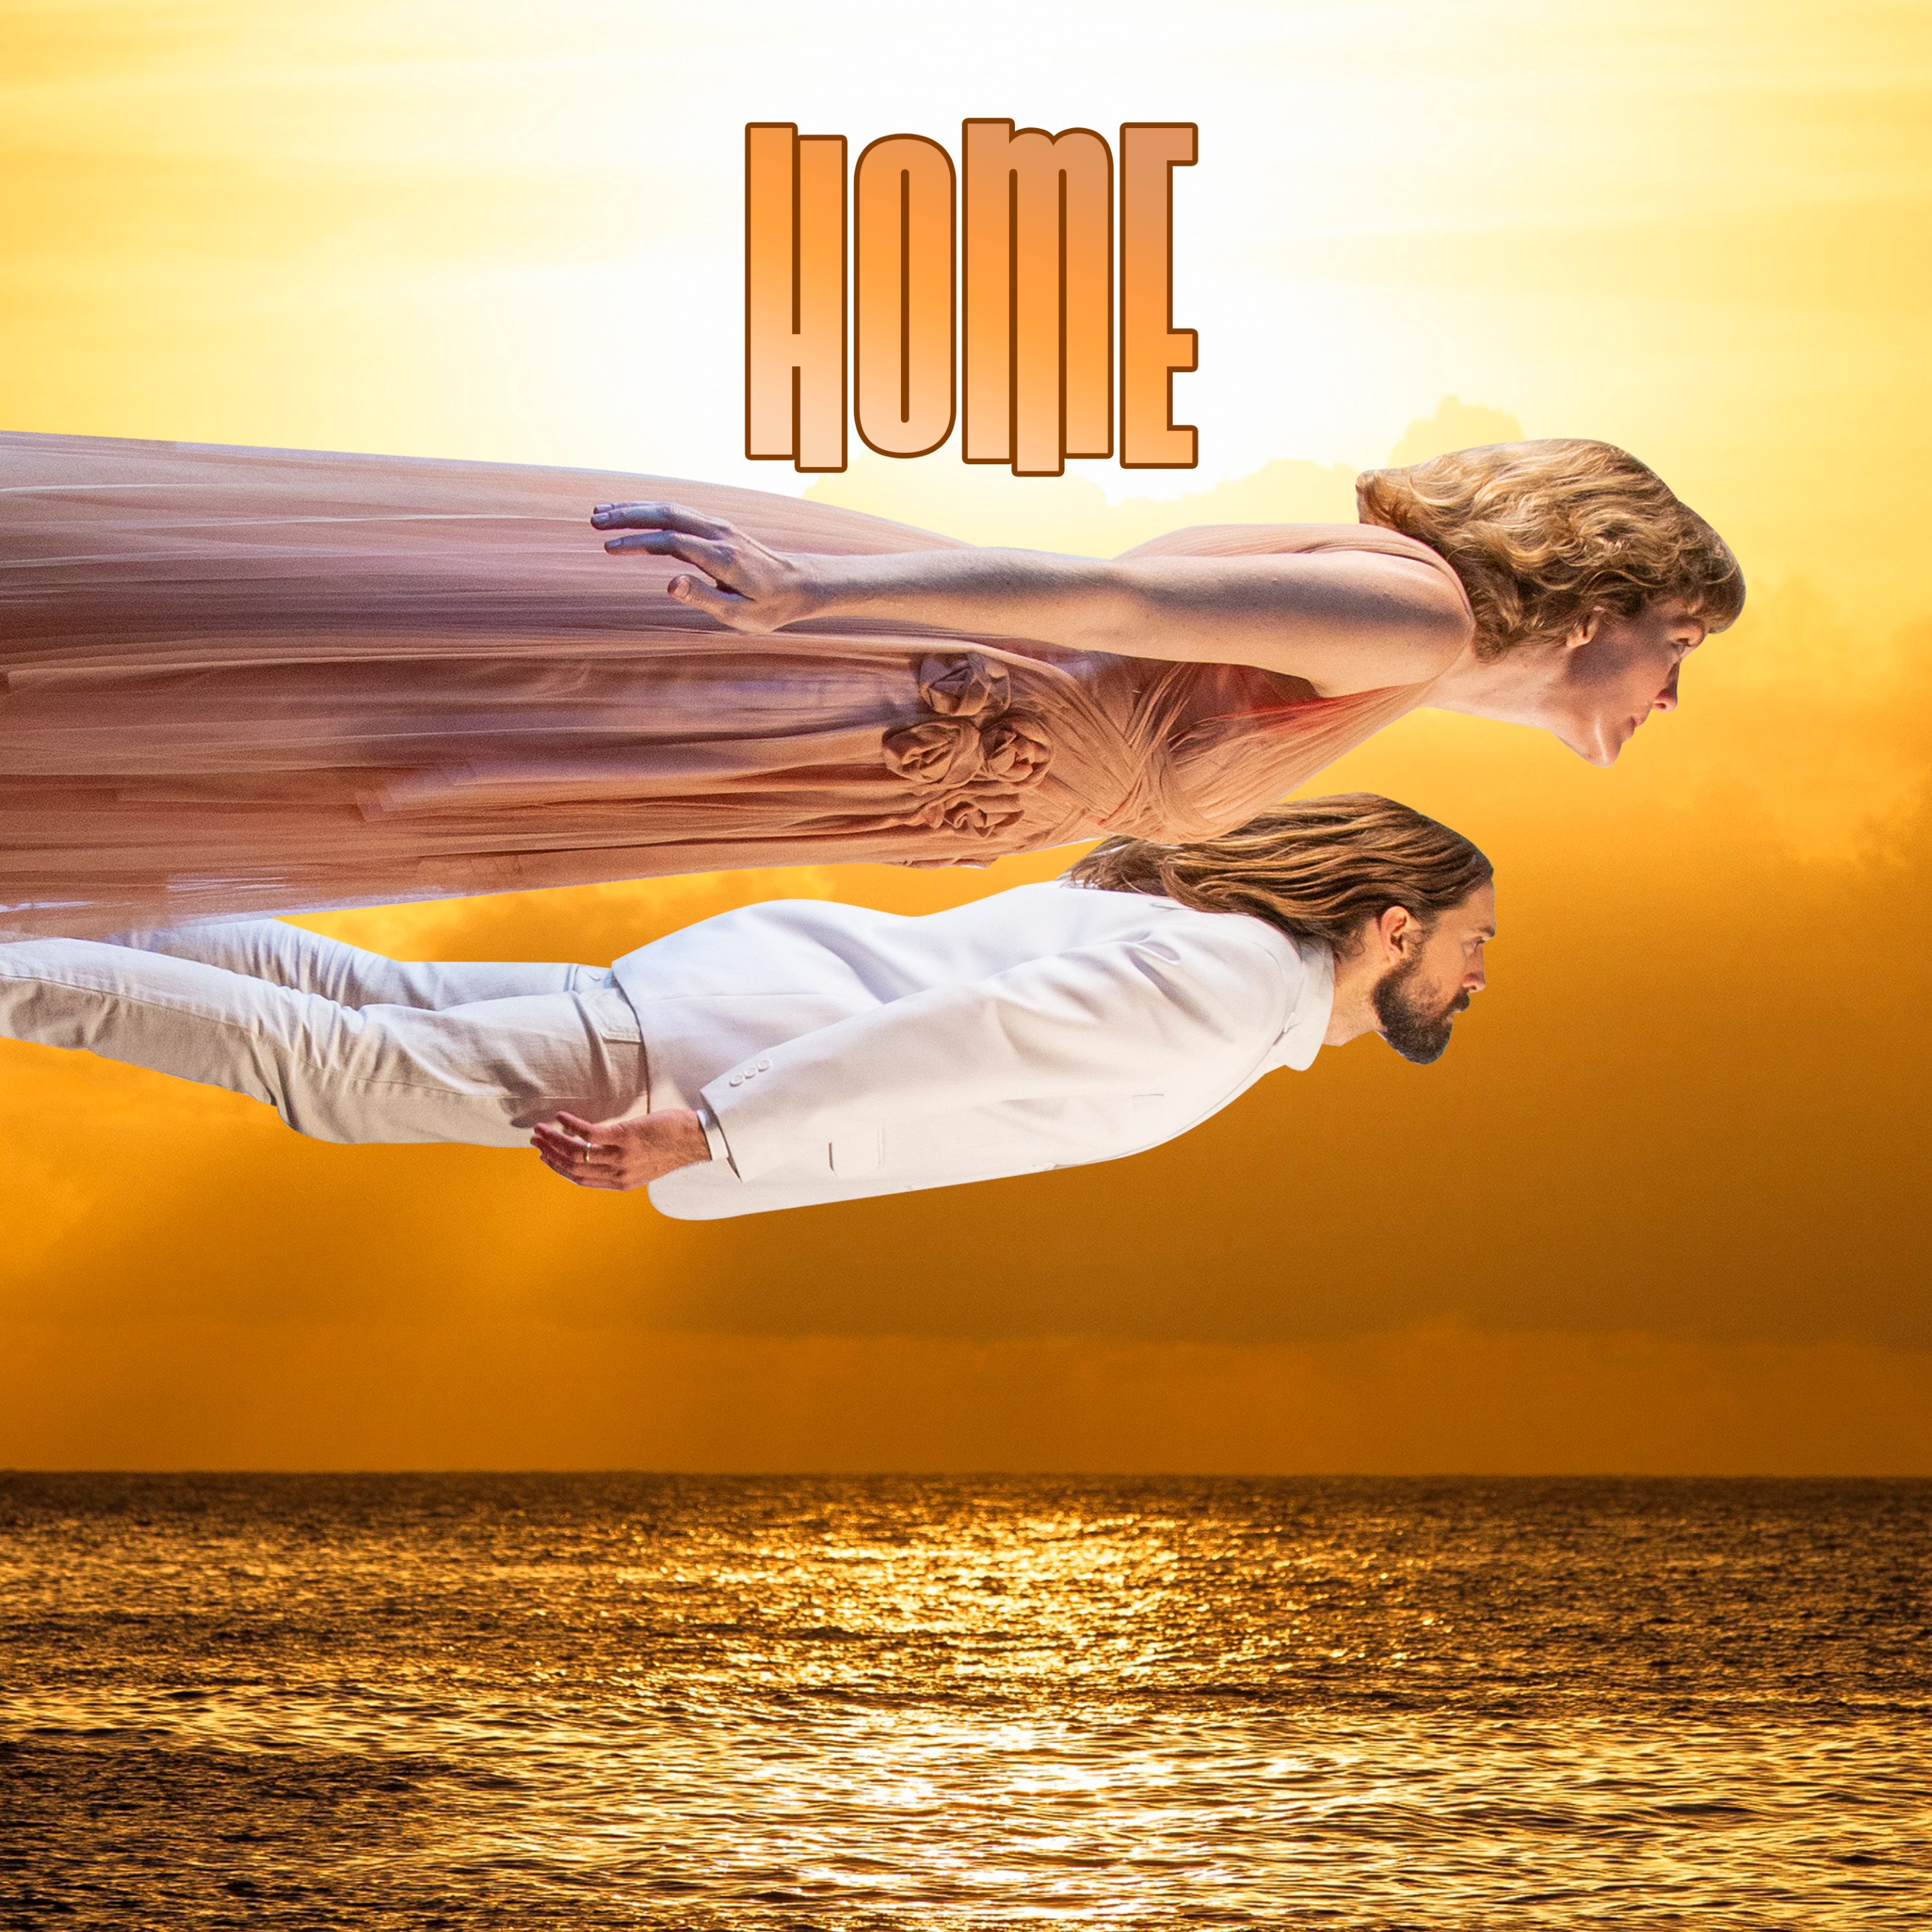 The early artwork for our single is a human flight over a golden ocean.